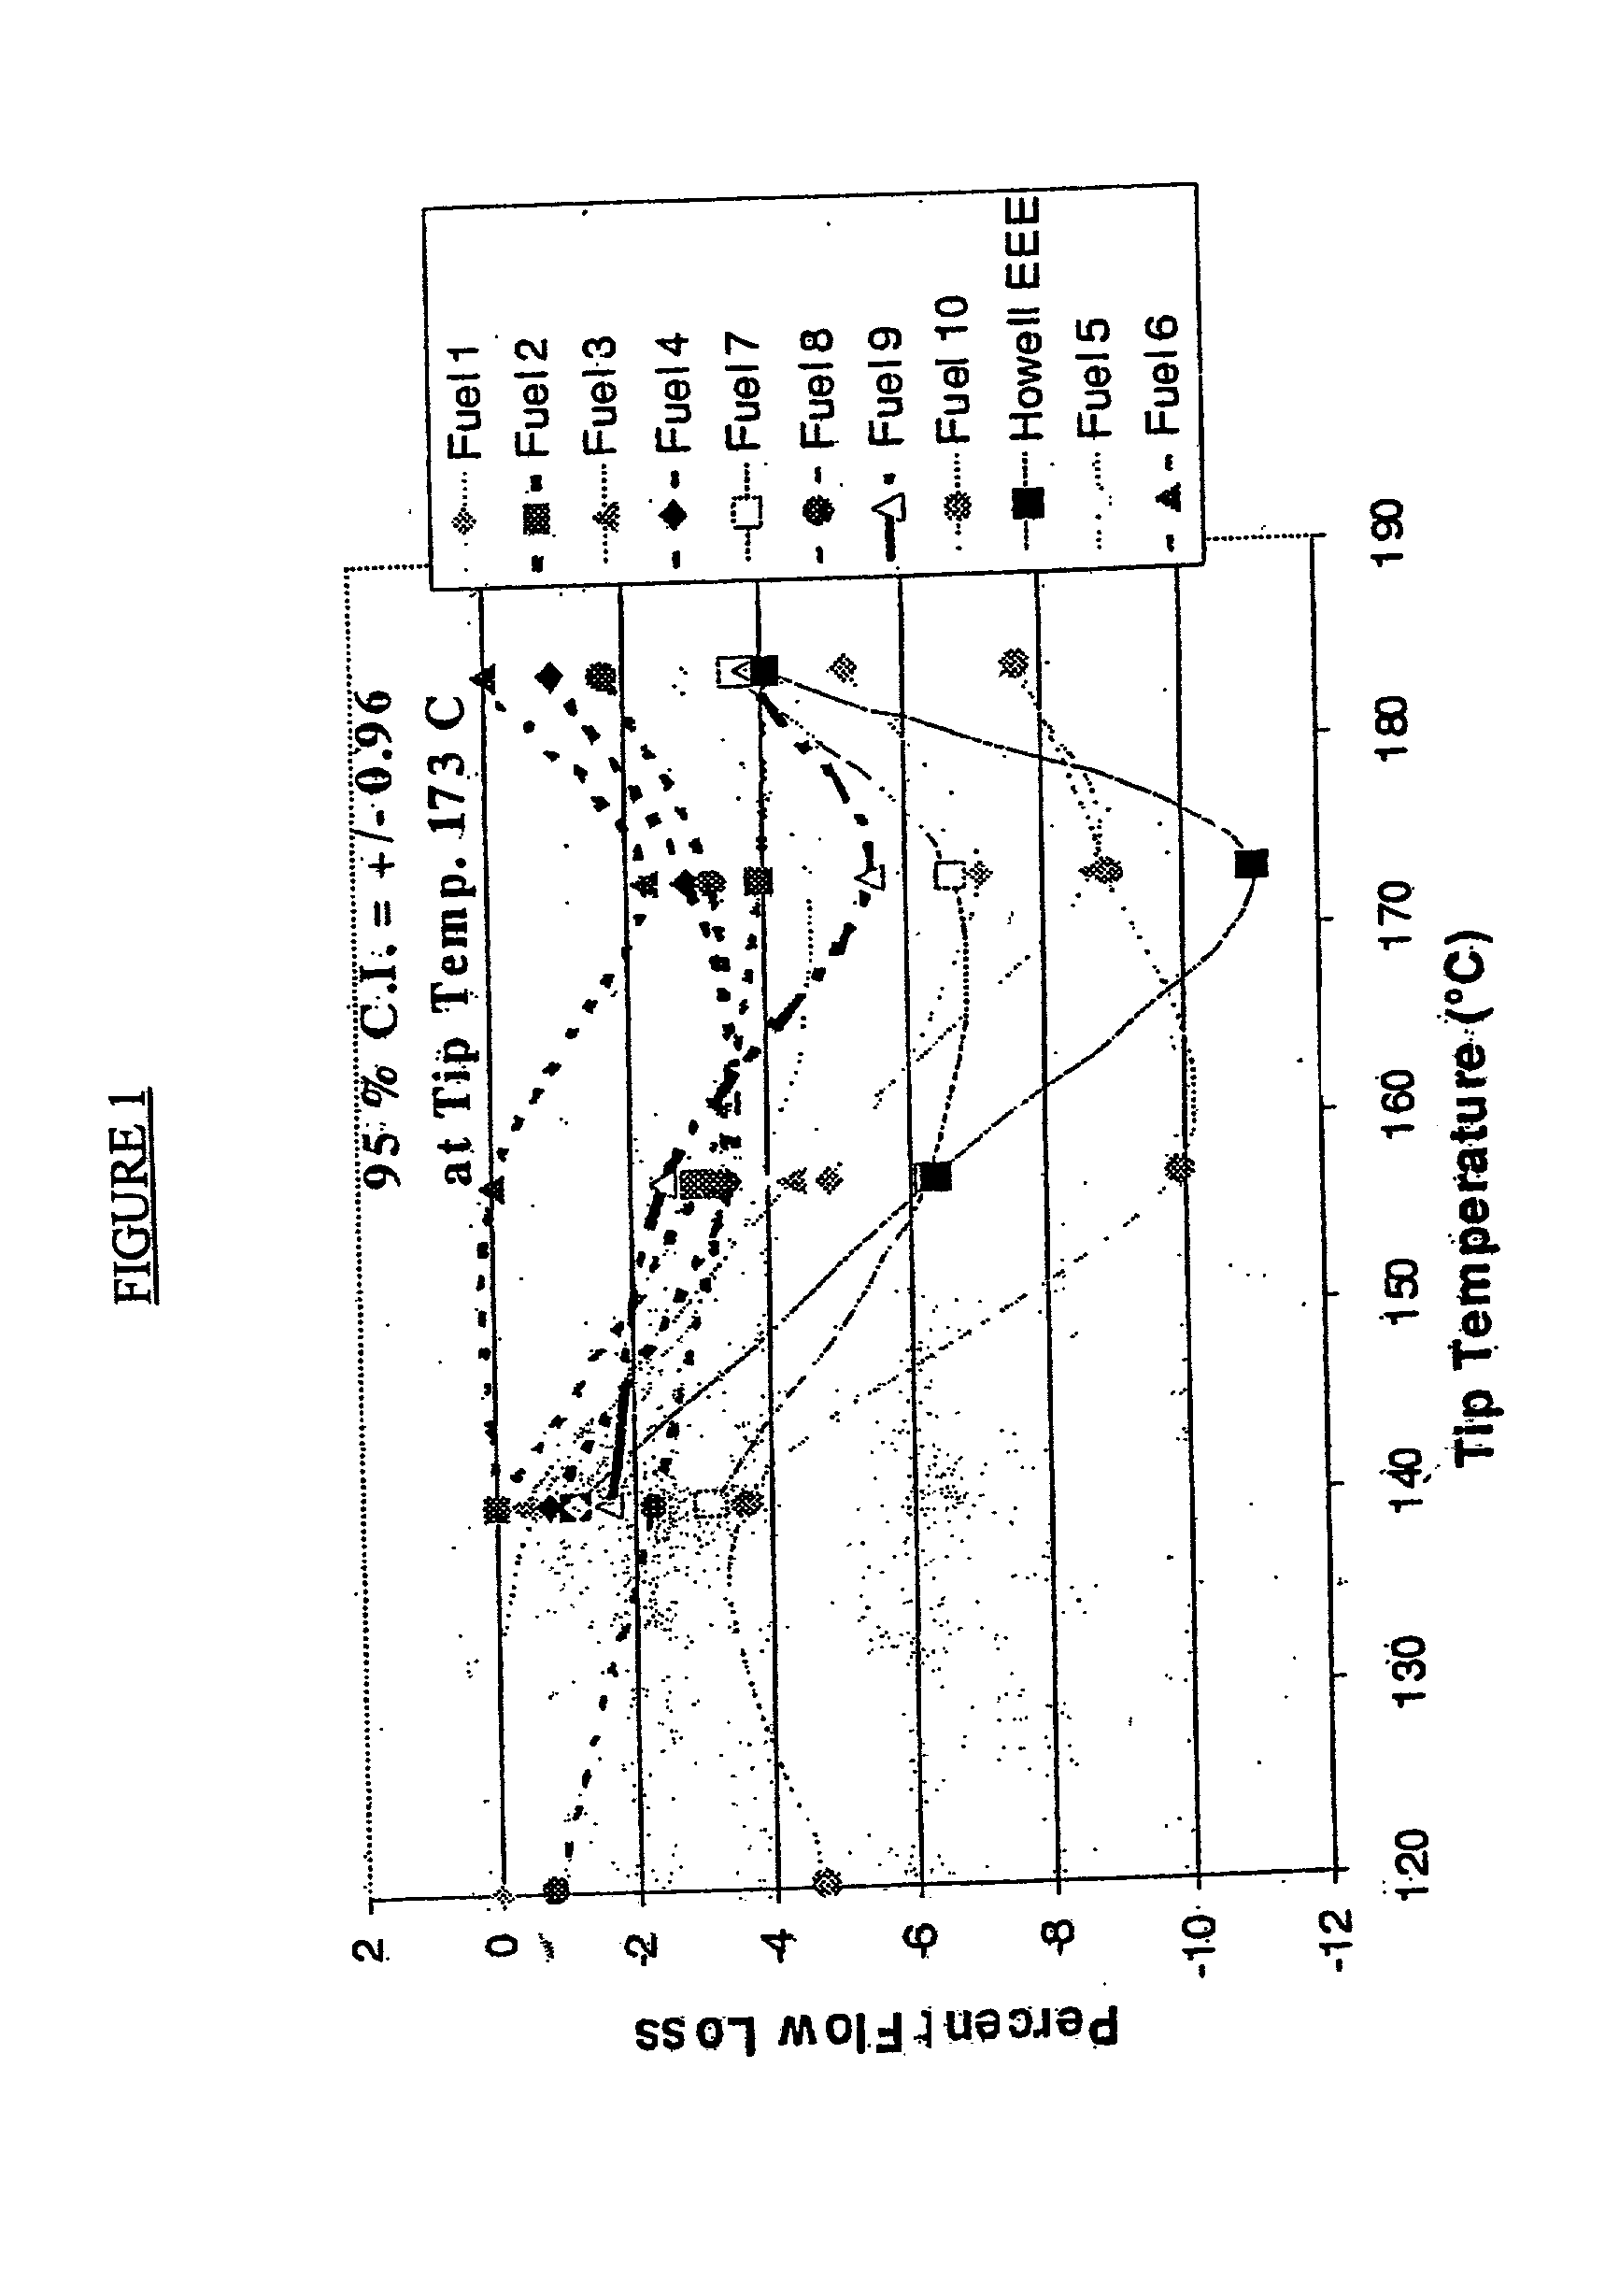 Method for controlling deposit formation in gasoline direct injection engine by use of a fuel having particular compositional characteristics